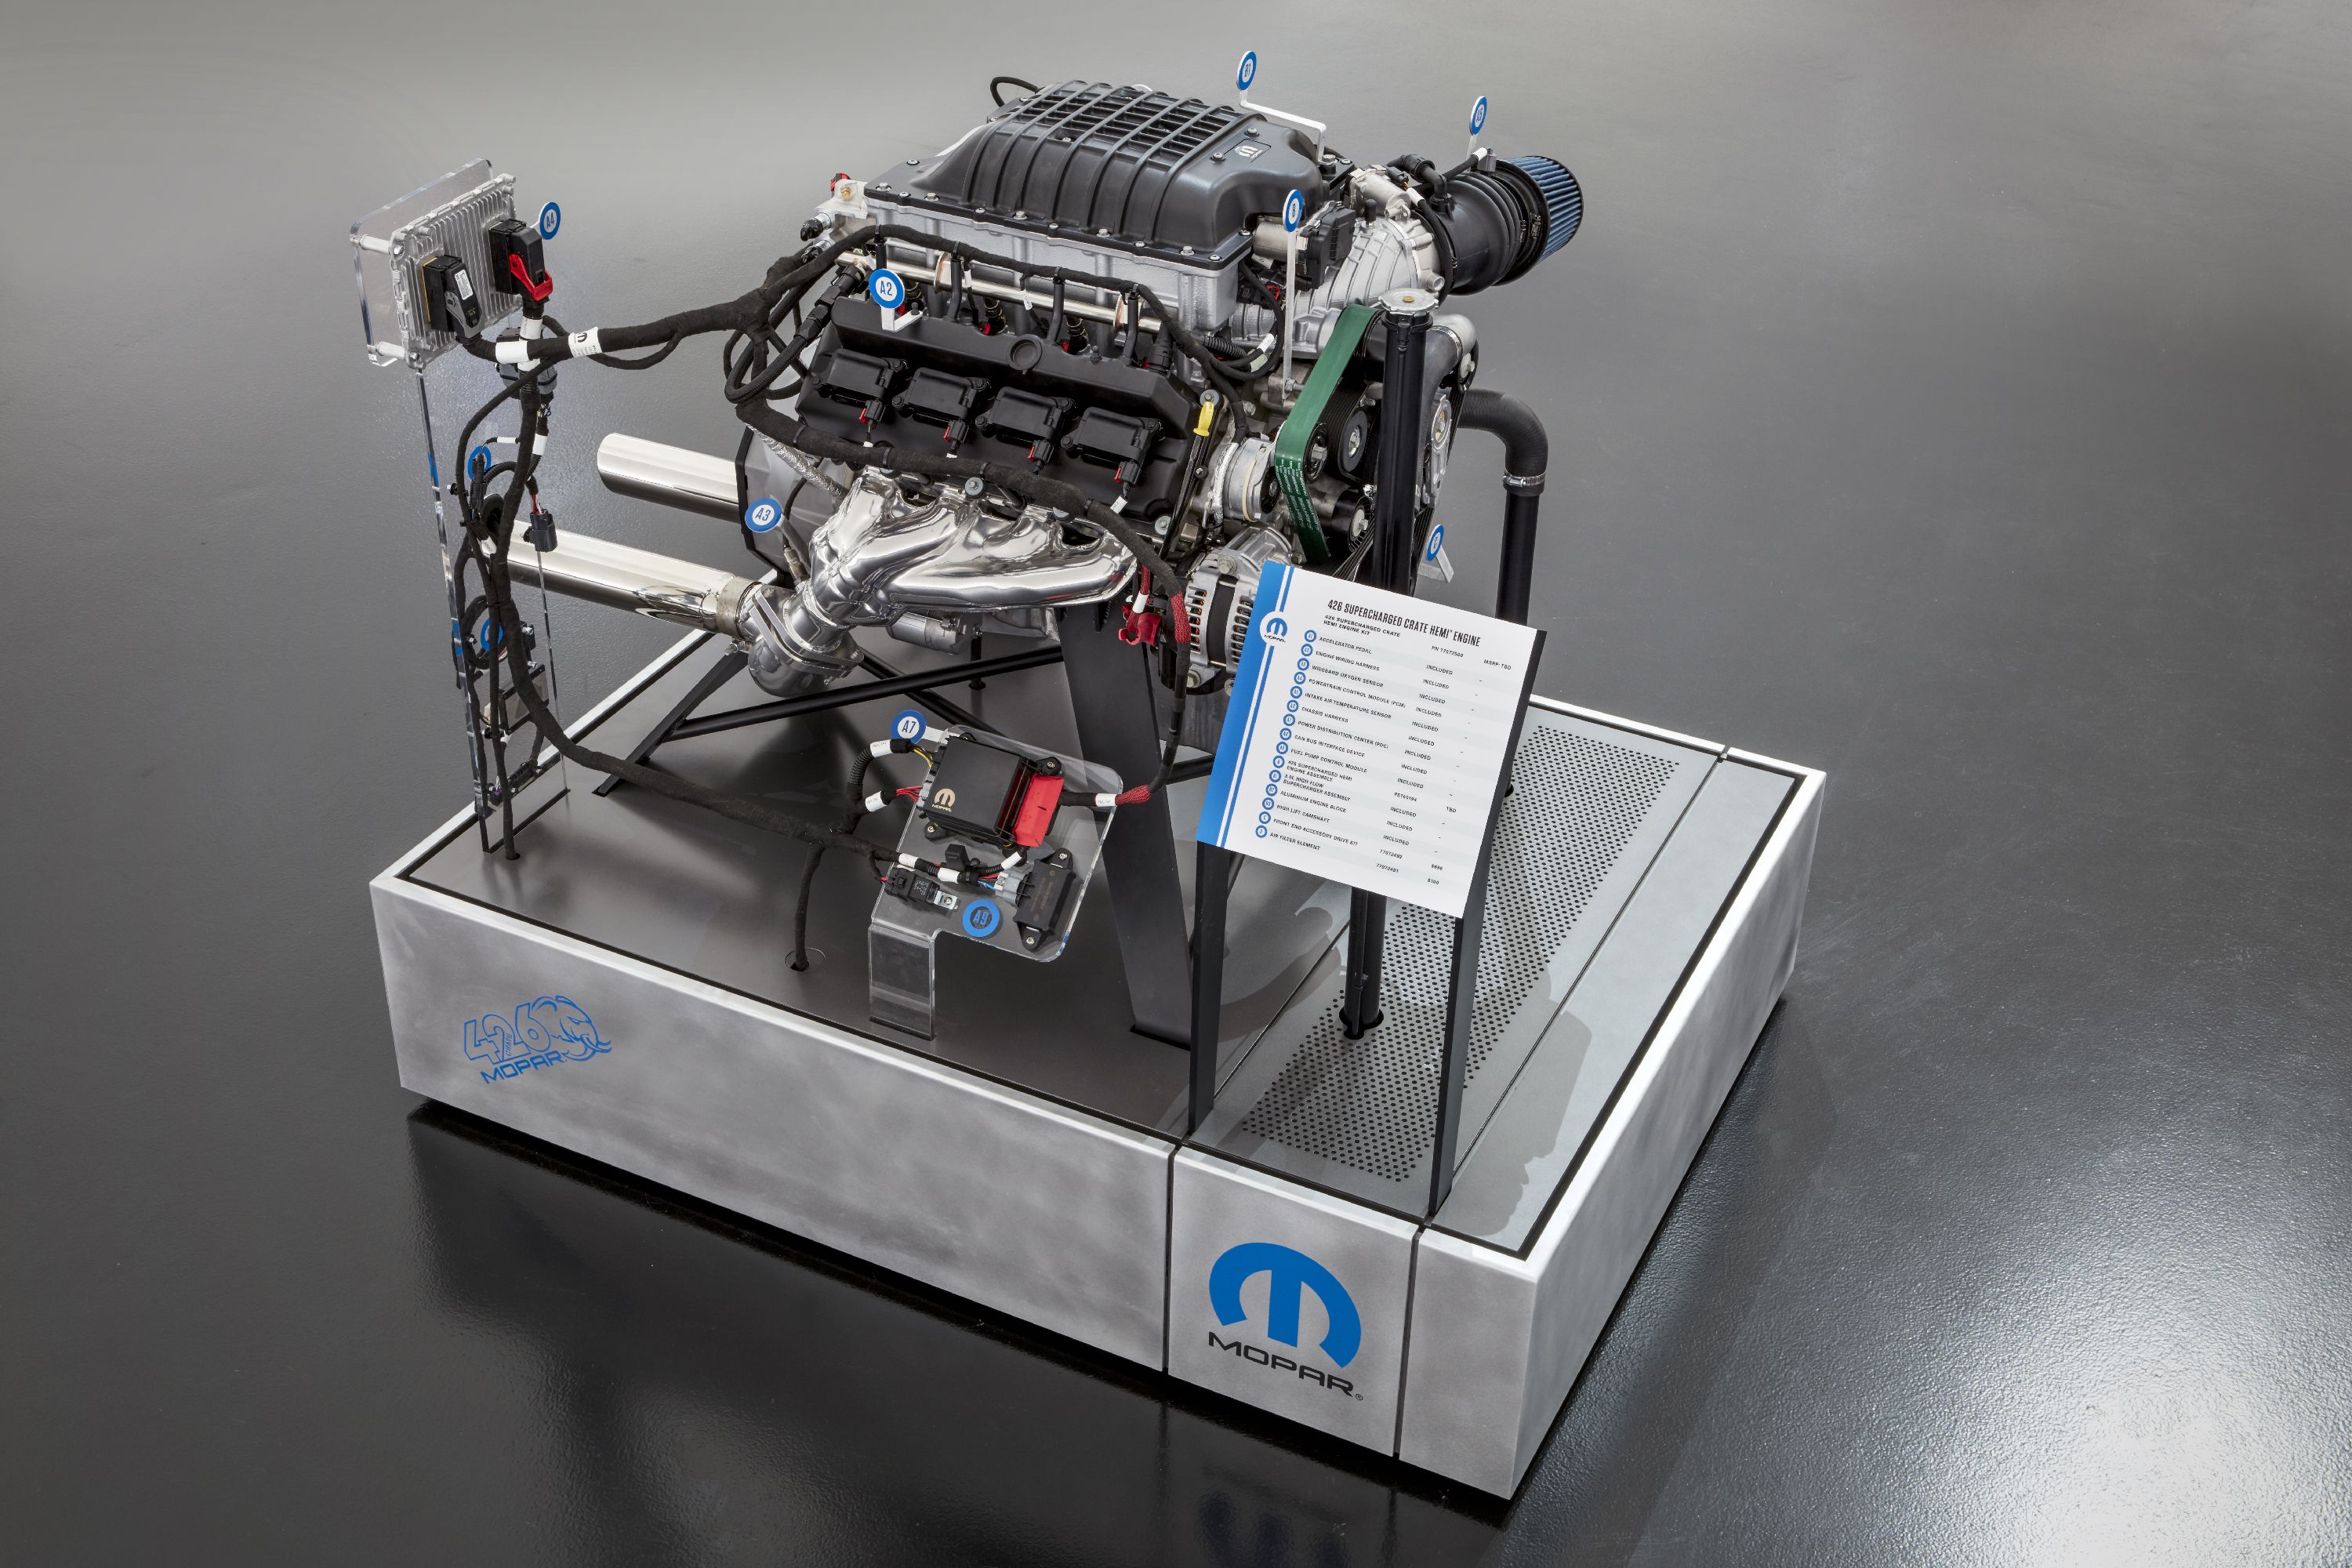 Chrysler's 1000-HP Mopar 426 Hemi Crate Engine Is Sold Out - Pricing,  Details